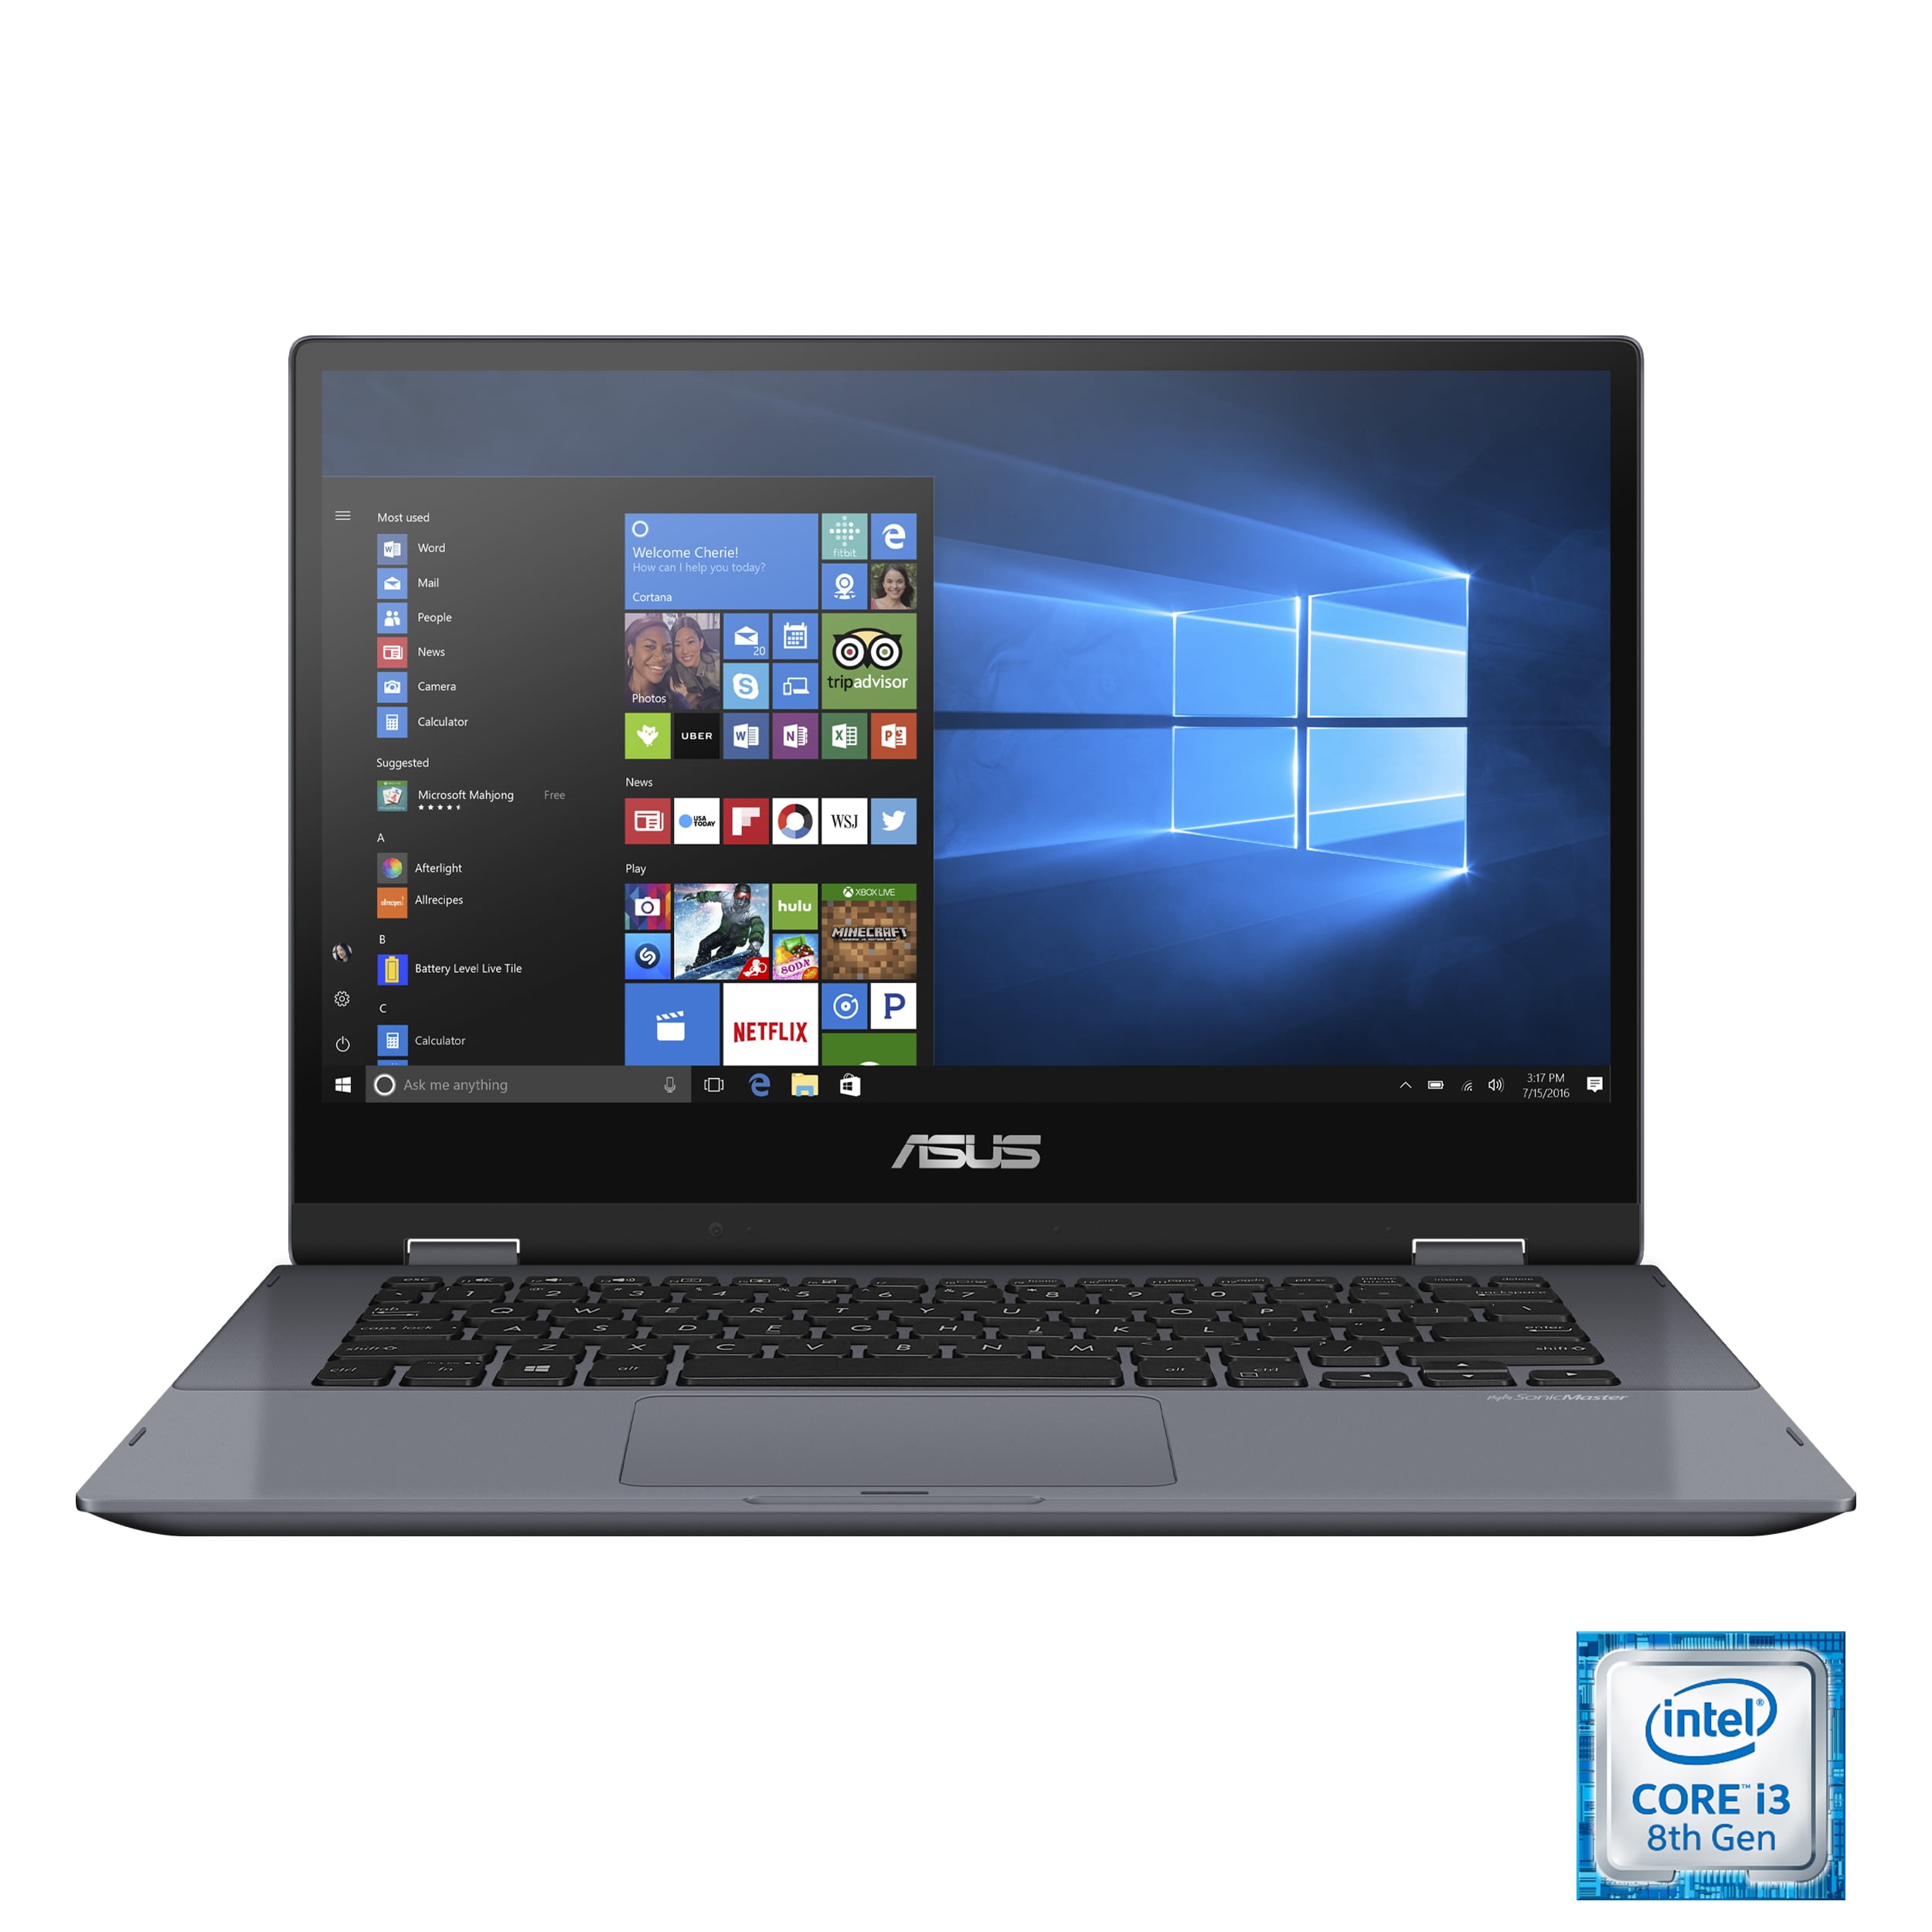 how to update zoom on asus laptop